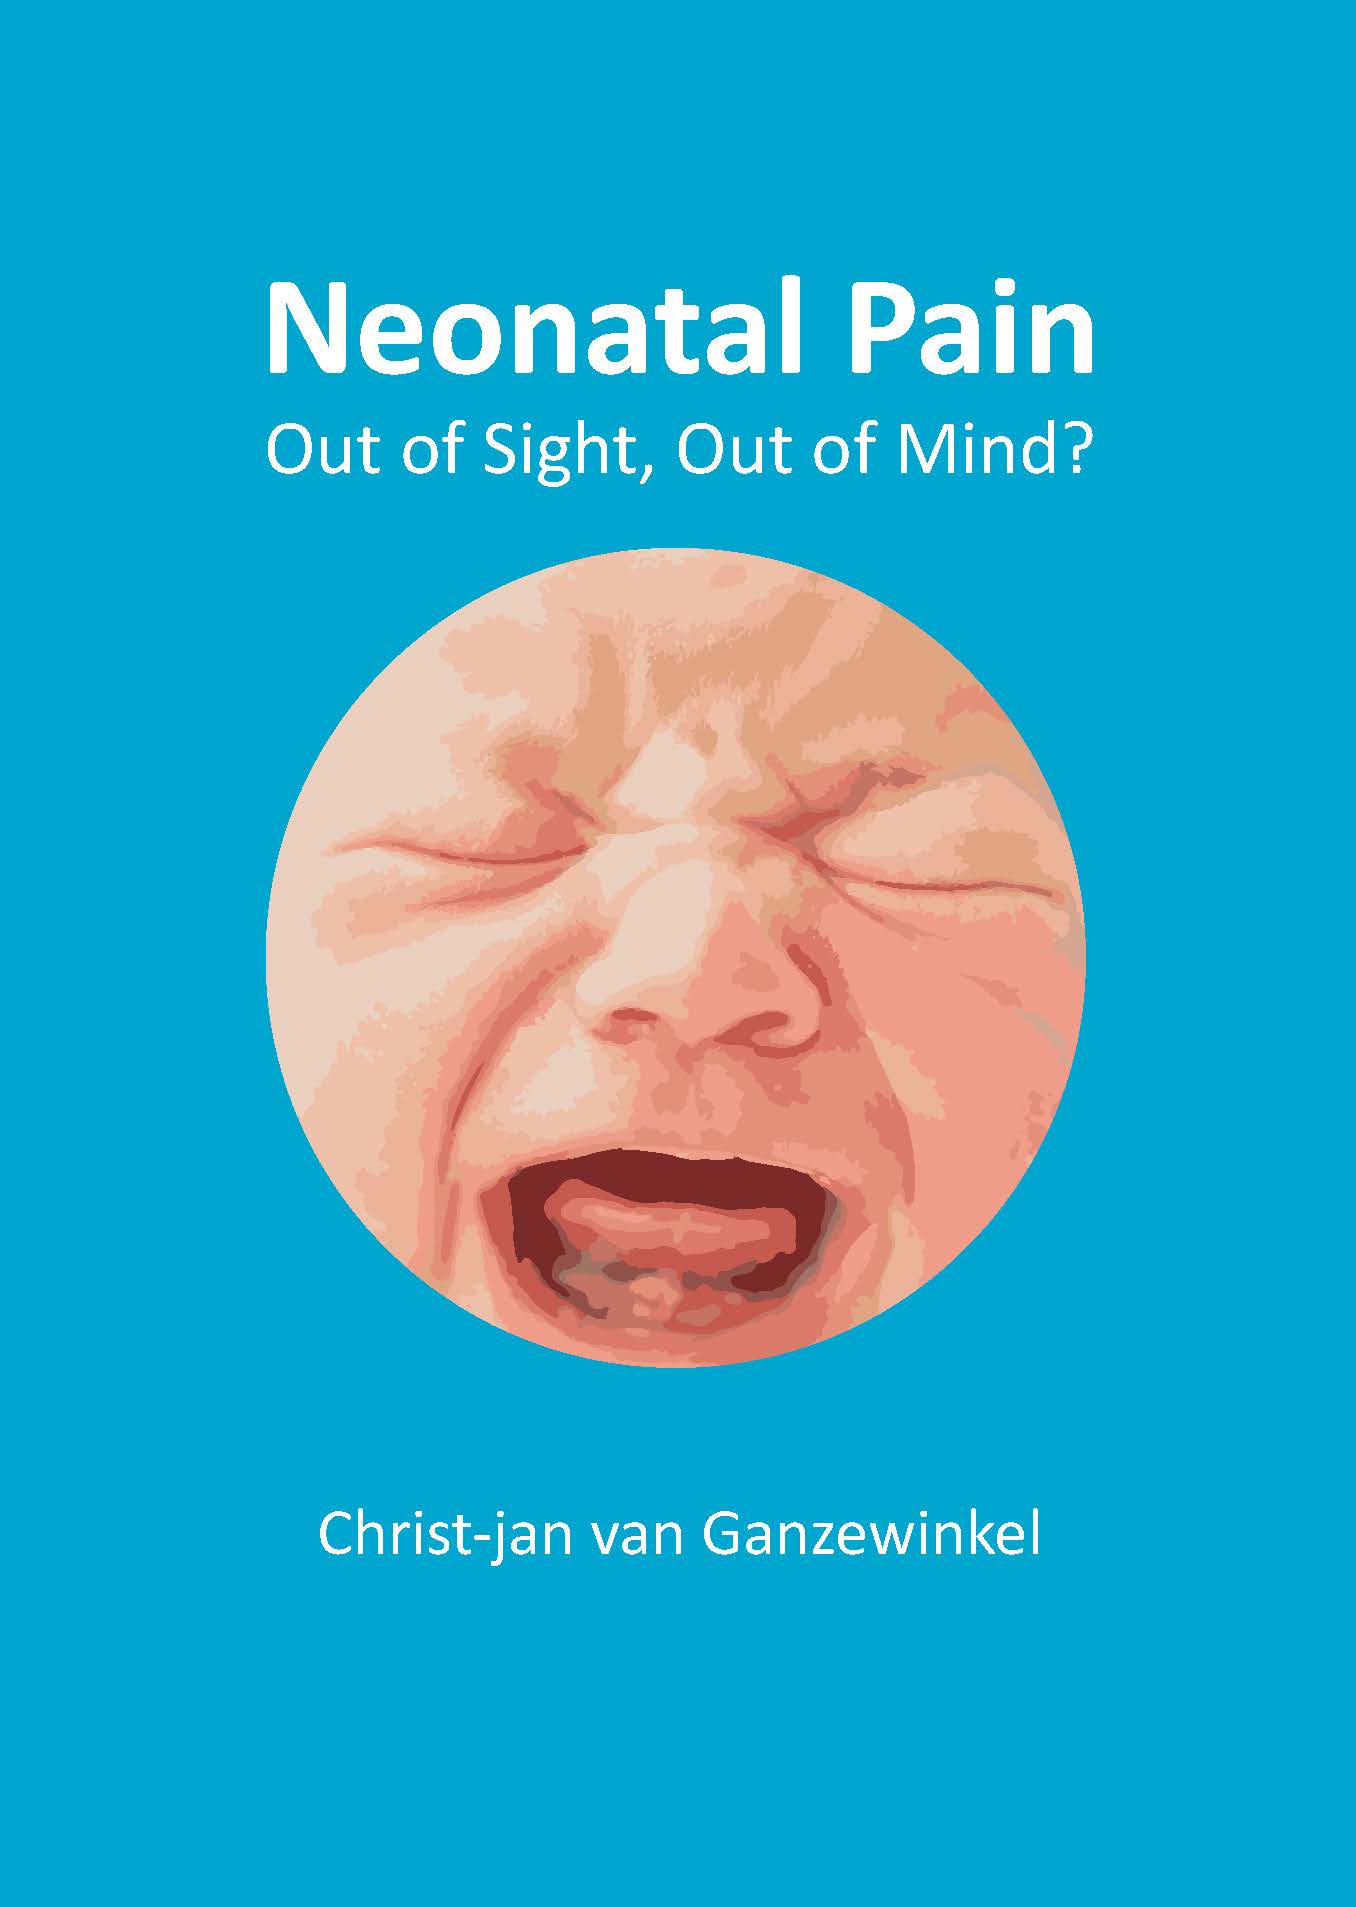 Neonatal pain out of sight out of mind